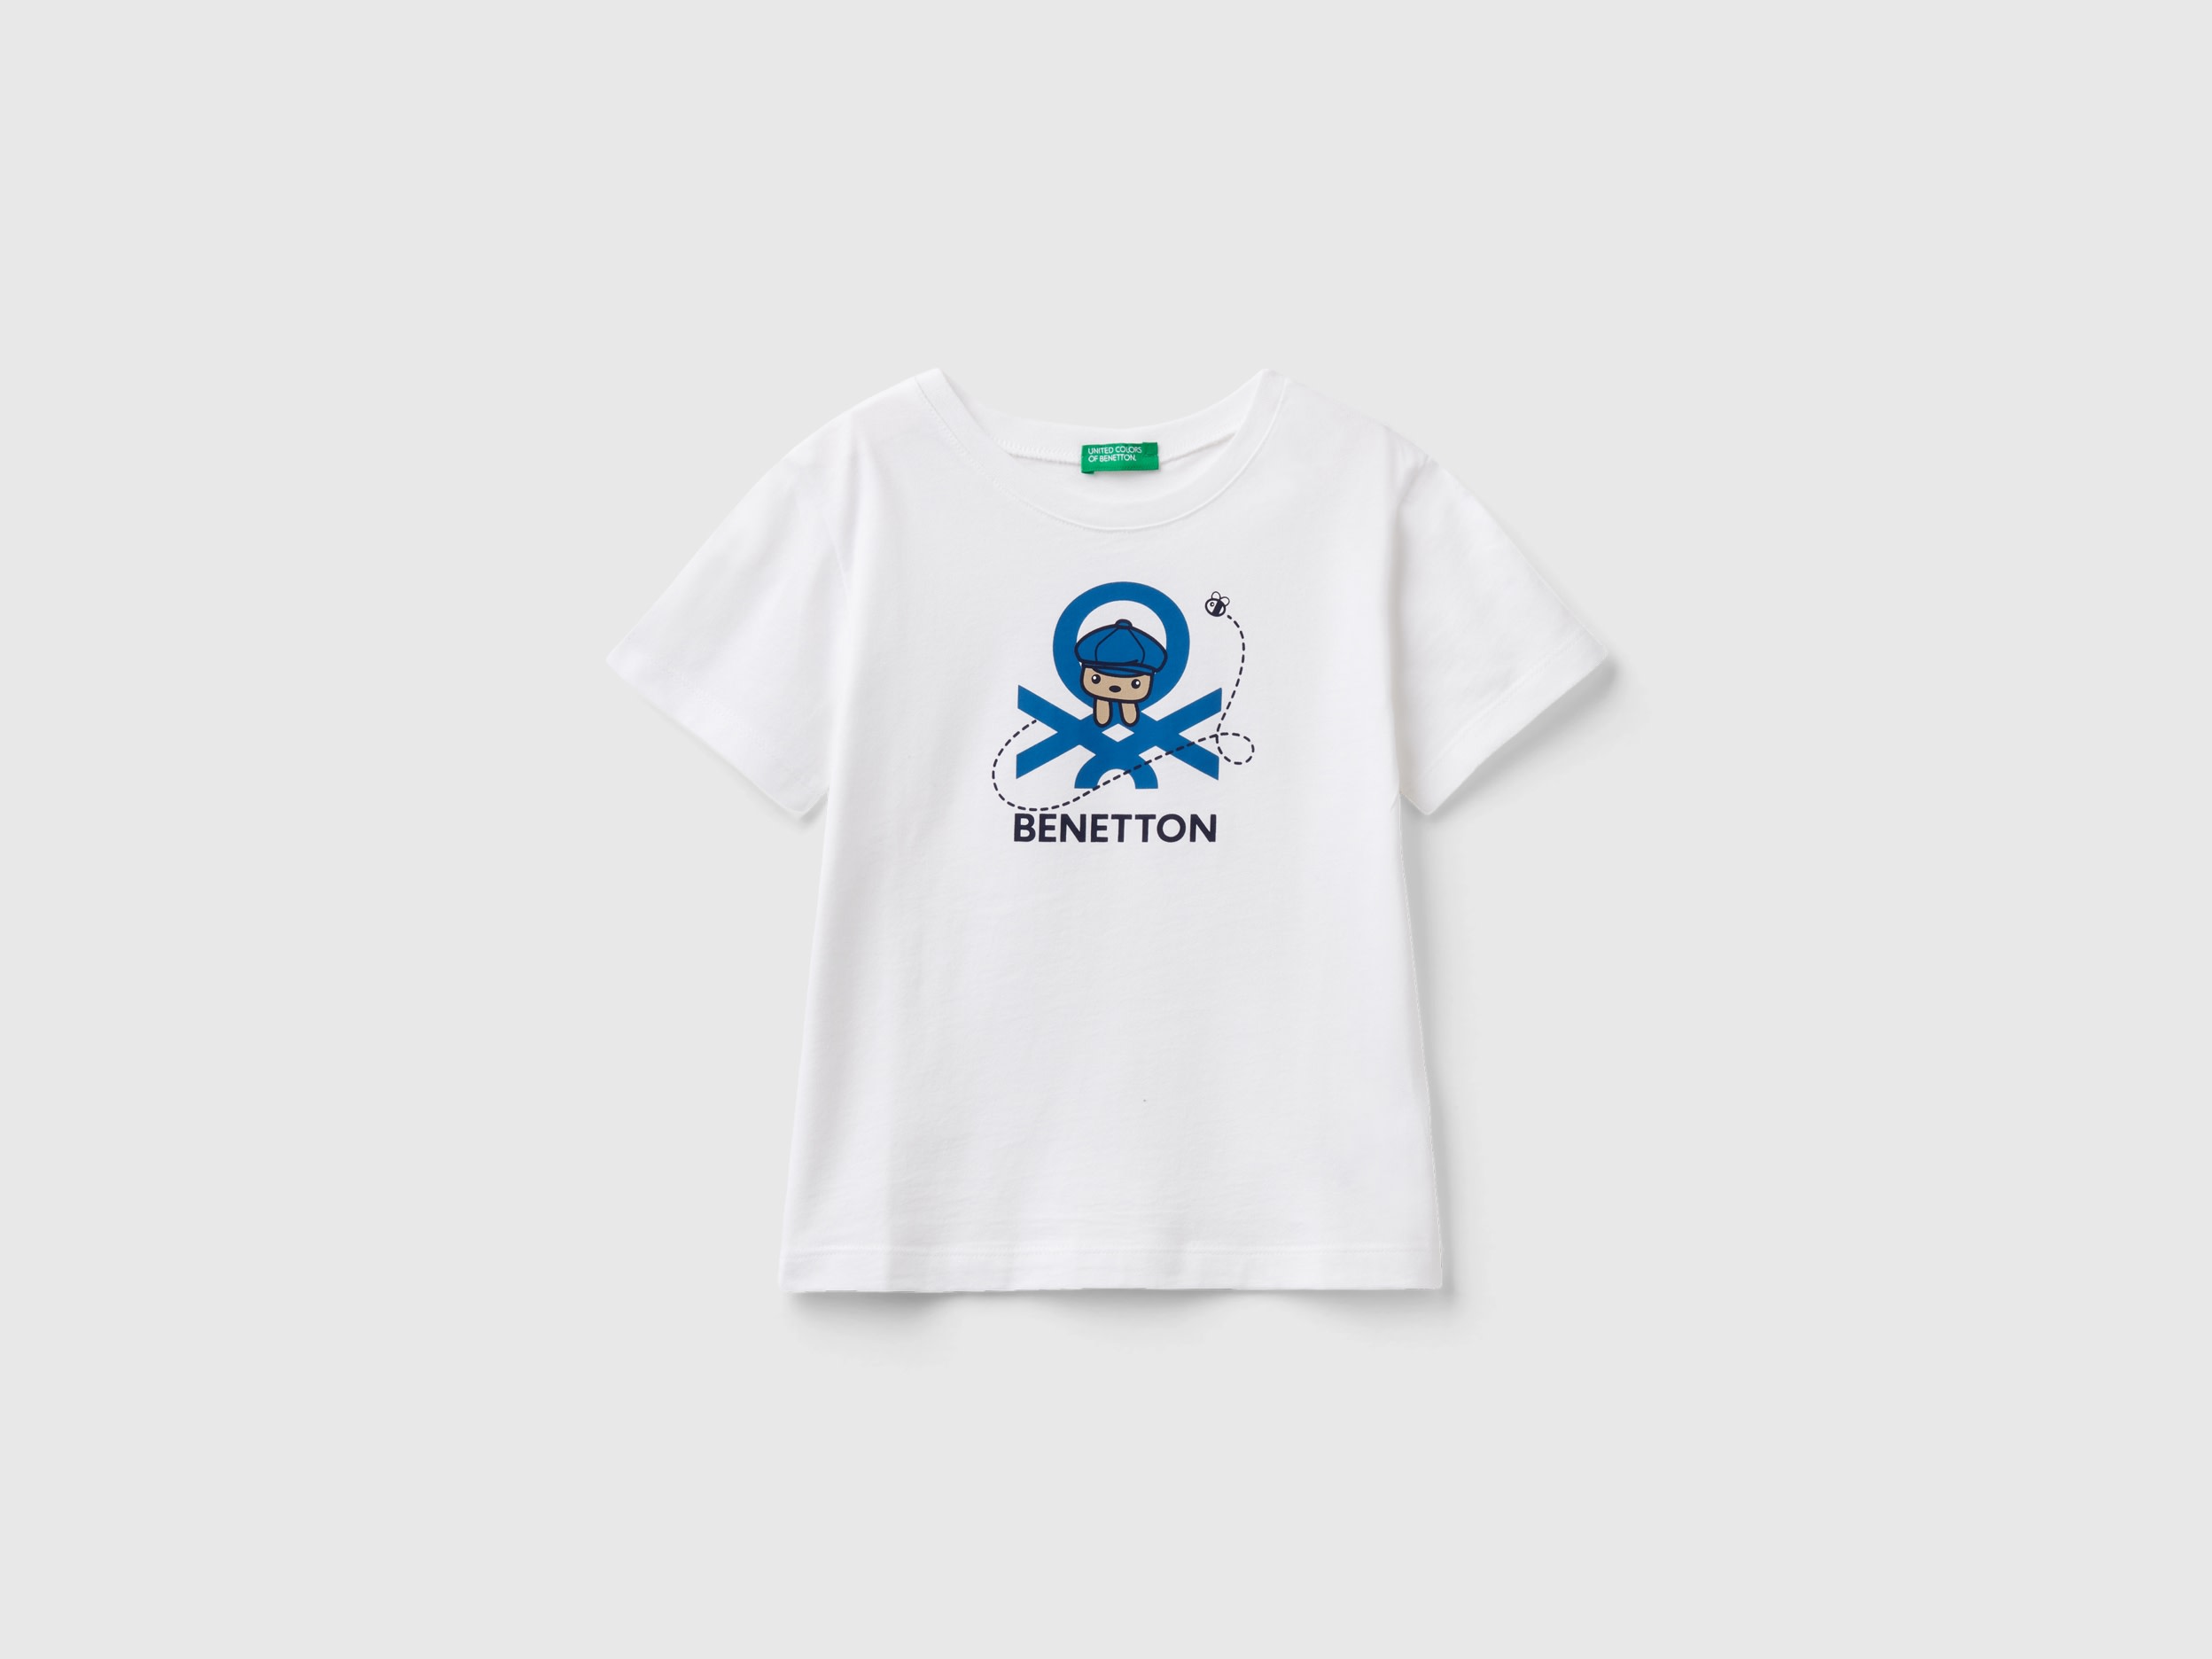 Benetton, T-shirt With Print In 100% Organic Cotton, size 2-3, White, Kids